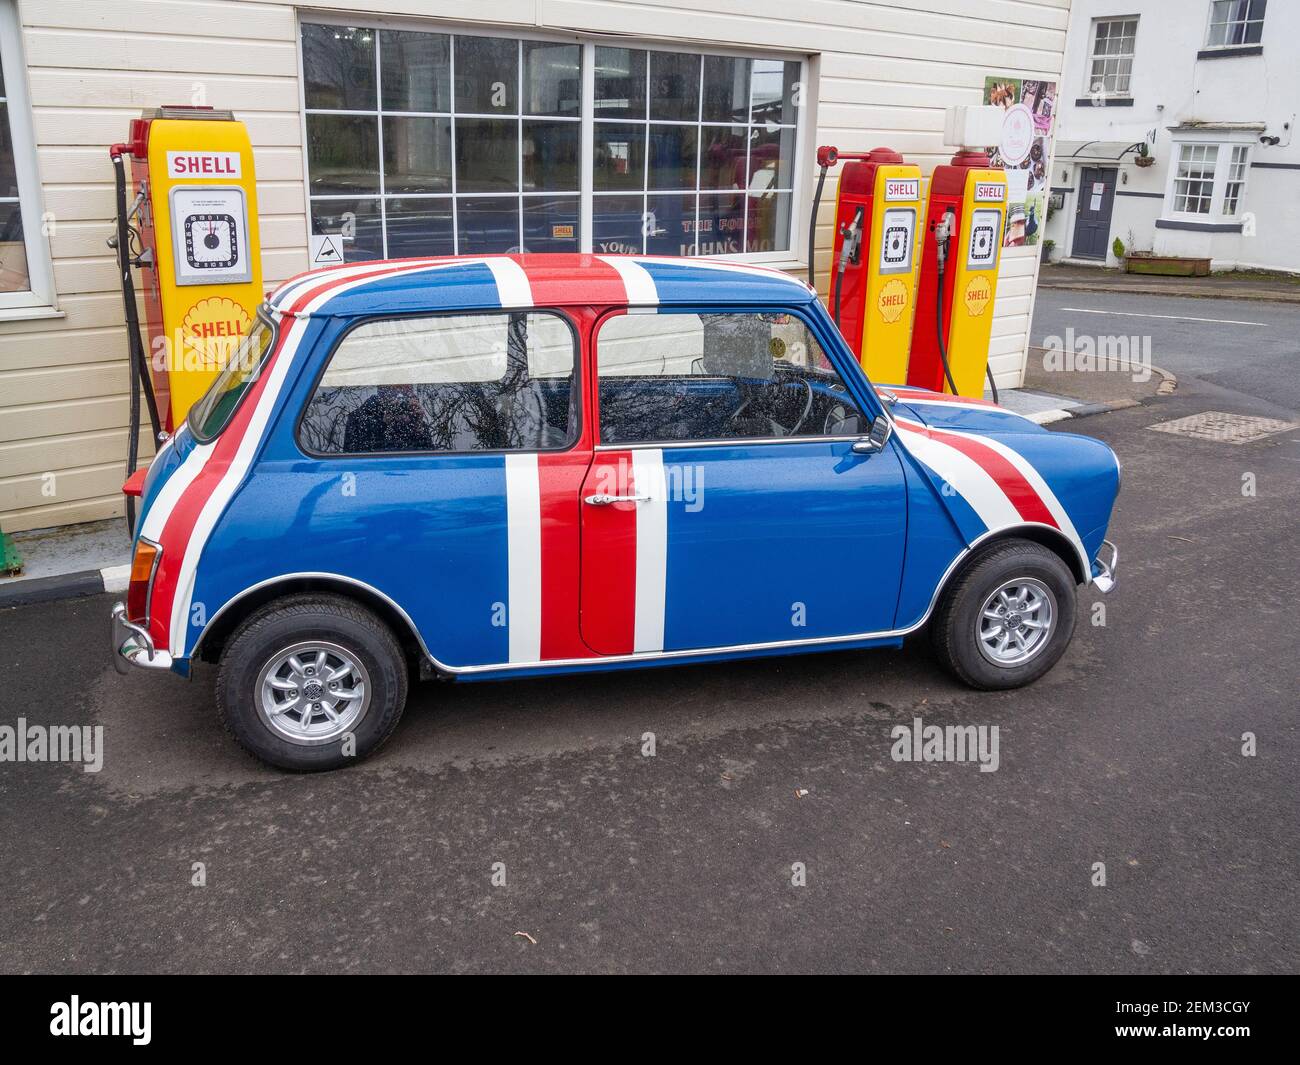 Vintage Austin Mini in Union Jack colours in front of old style Shell petrol pumps, Patishall, Northamptonshire, UK Stock Photo